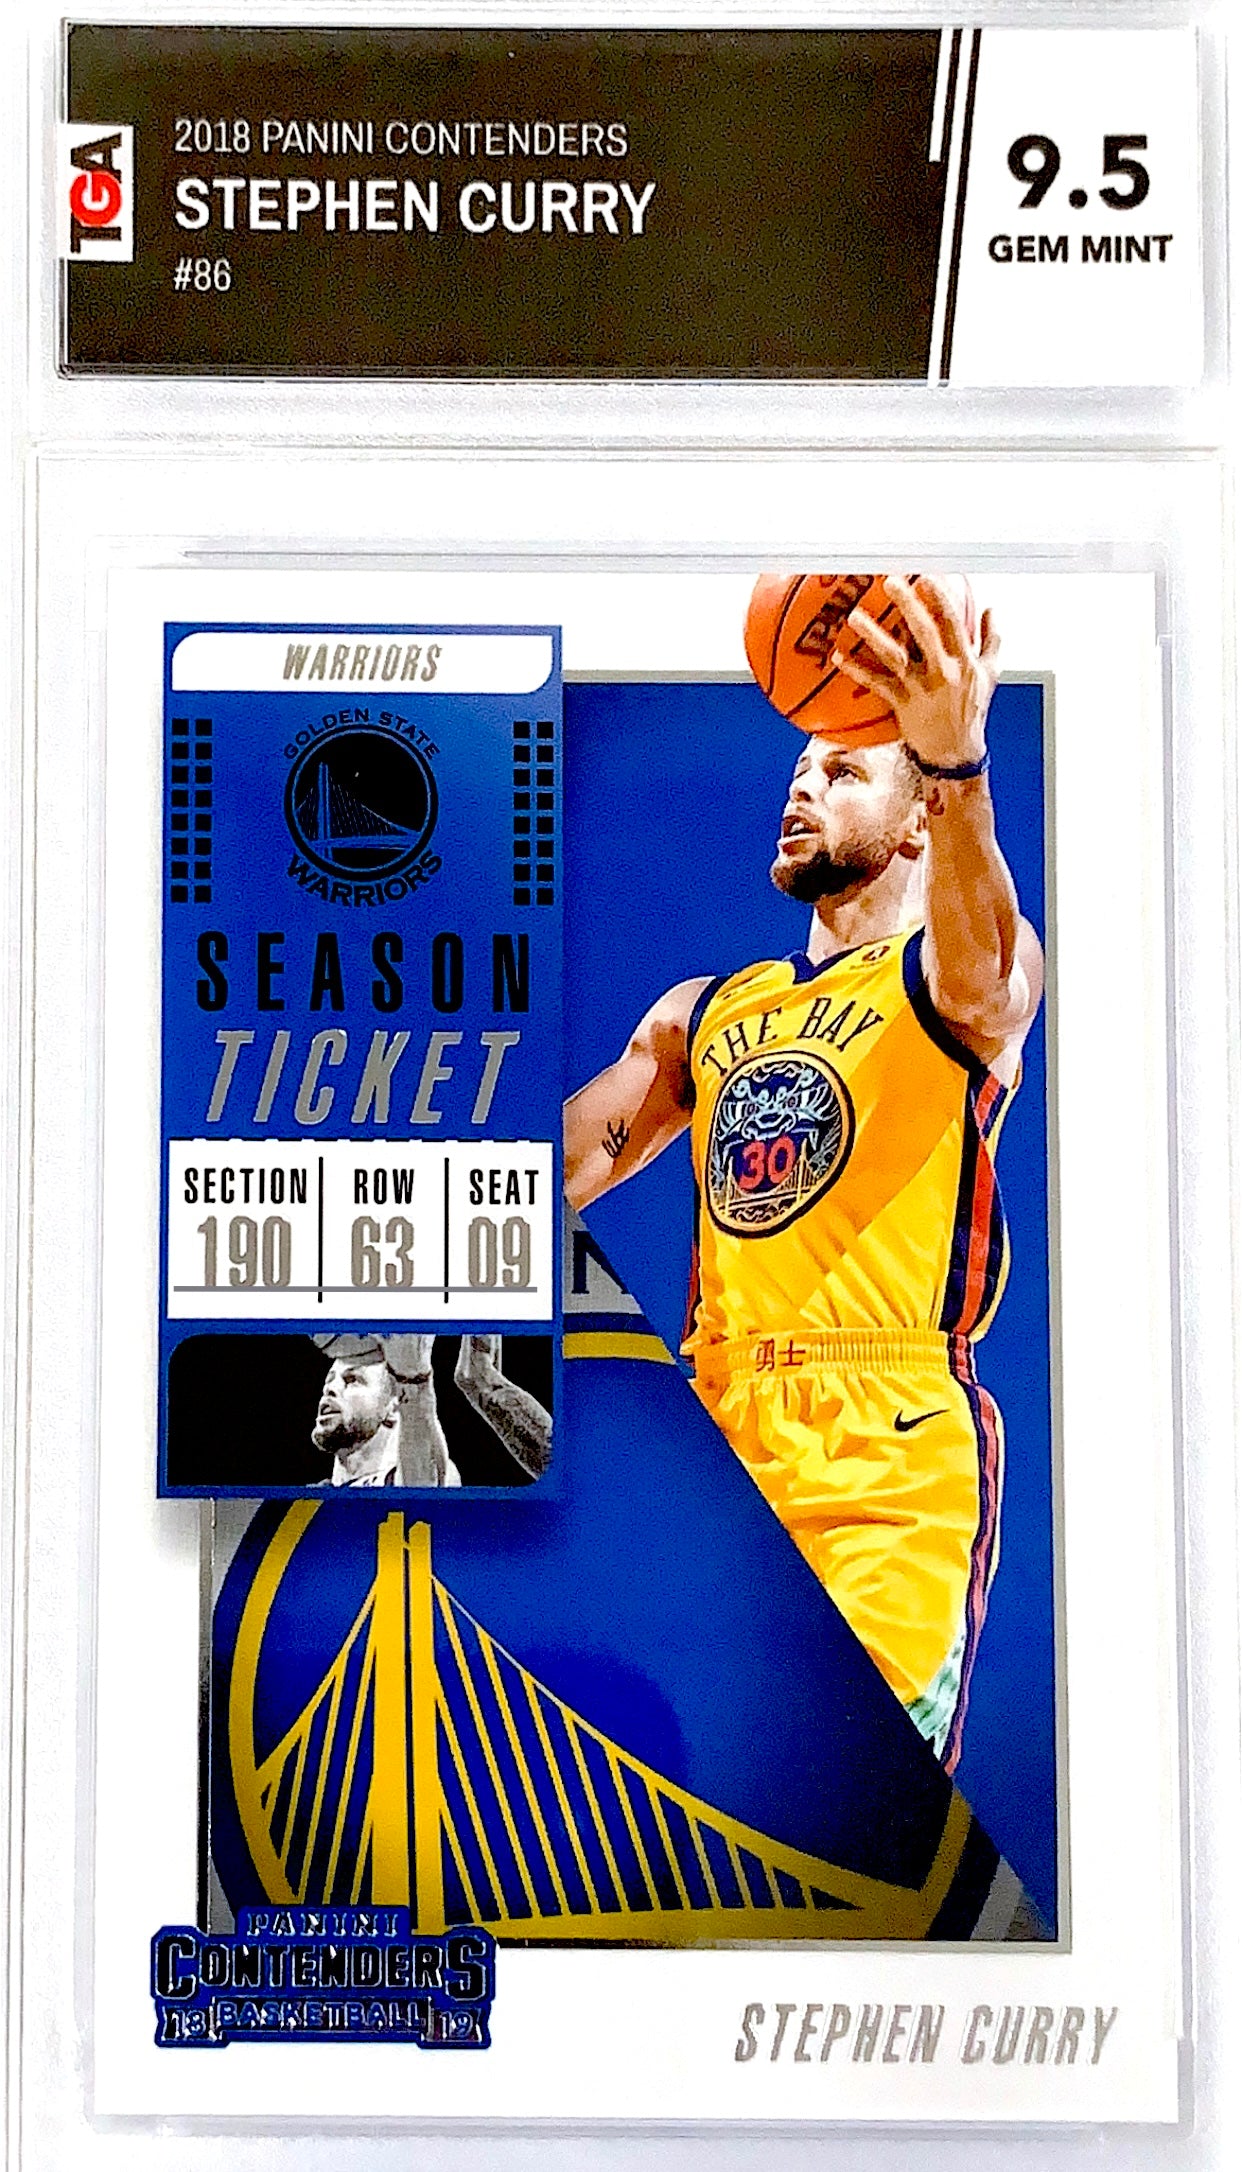 2018-19 Contenders Stephen Curry TGA 9.5